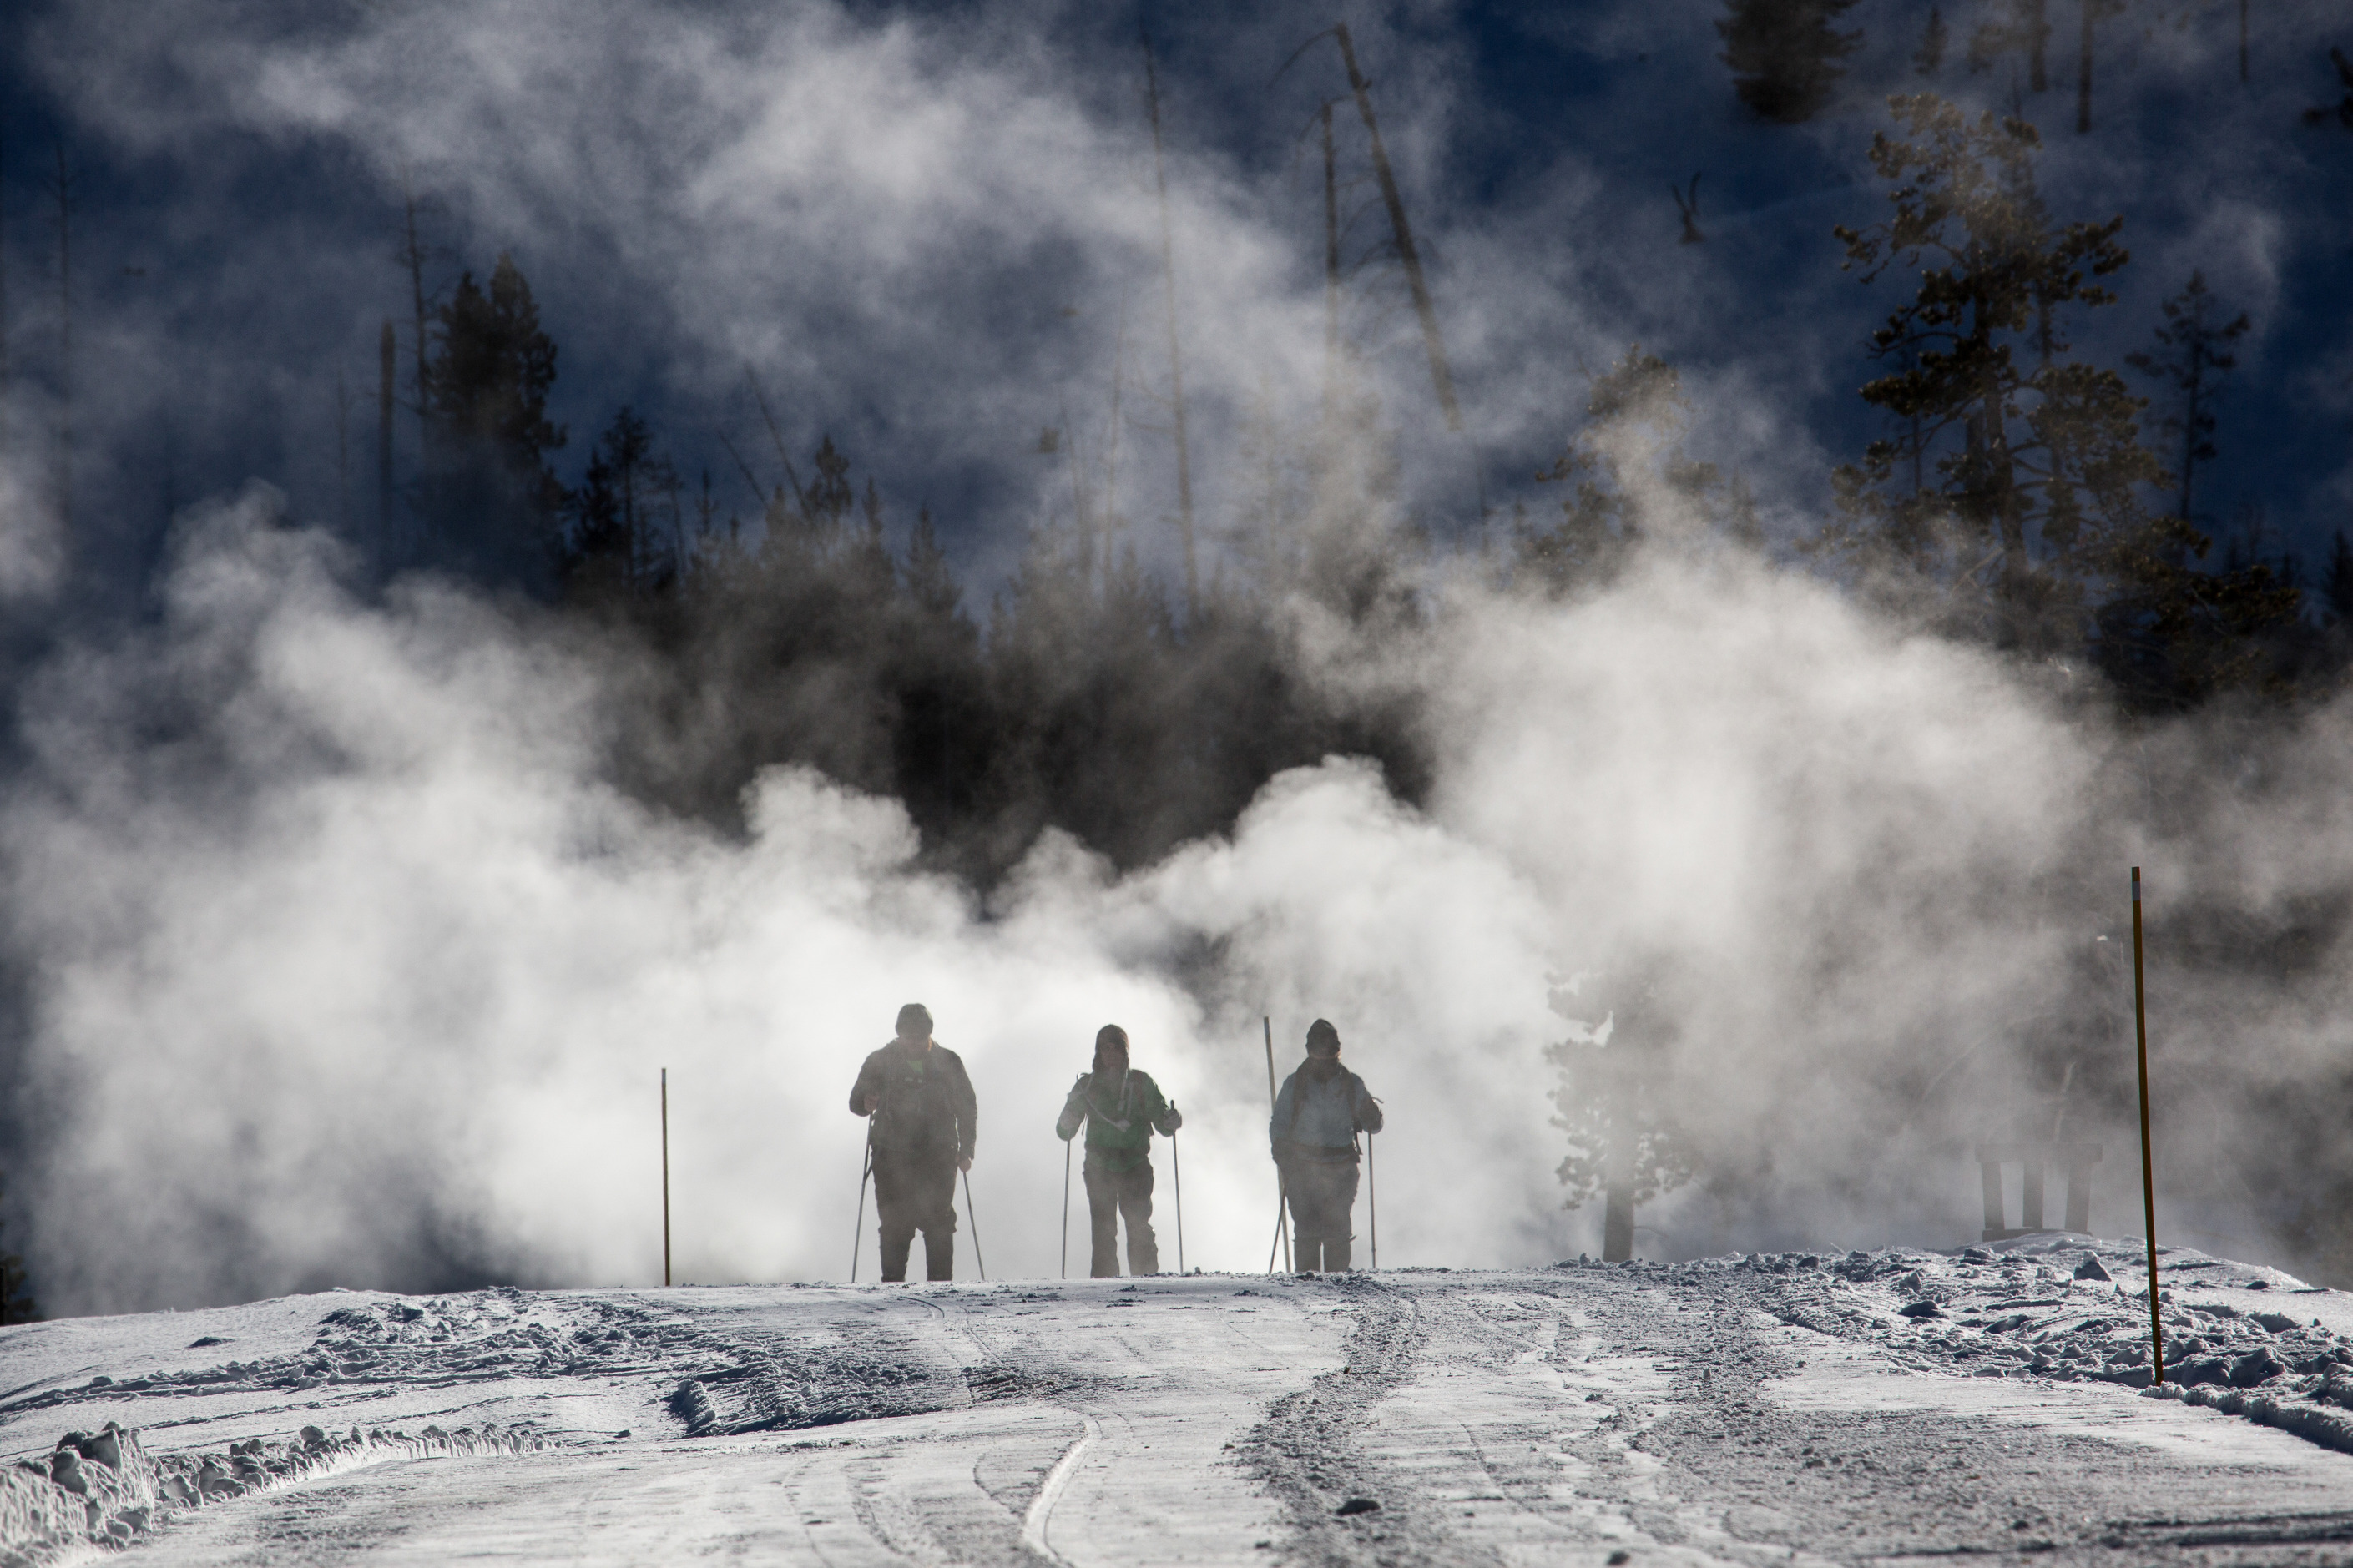 Three skiers are skiing towards camers on a groomed road with steam in the background